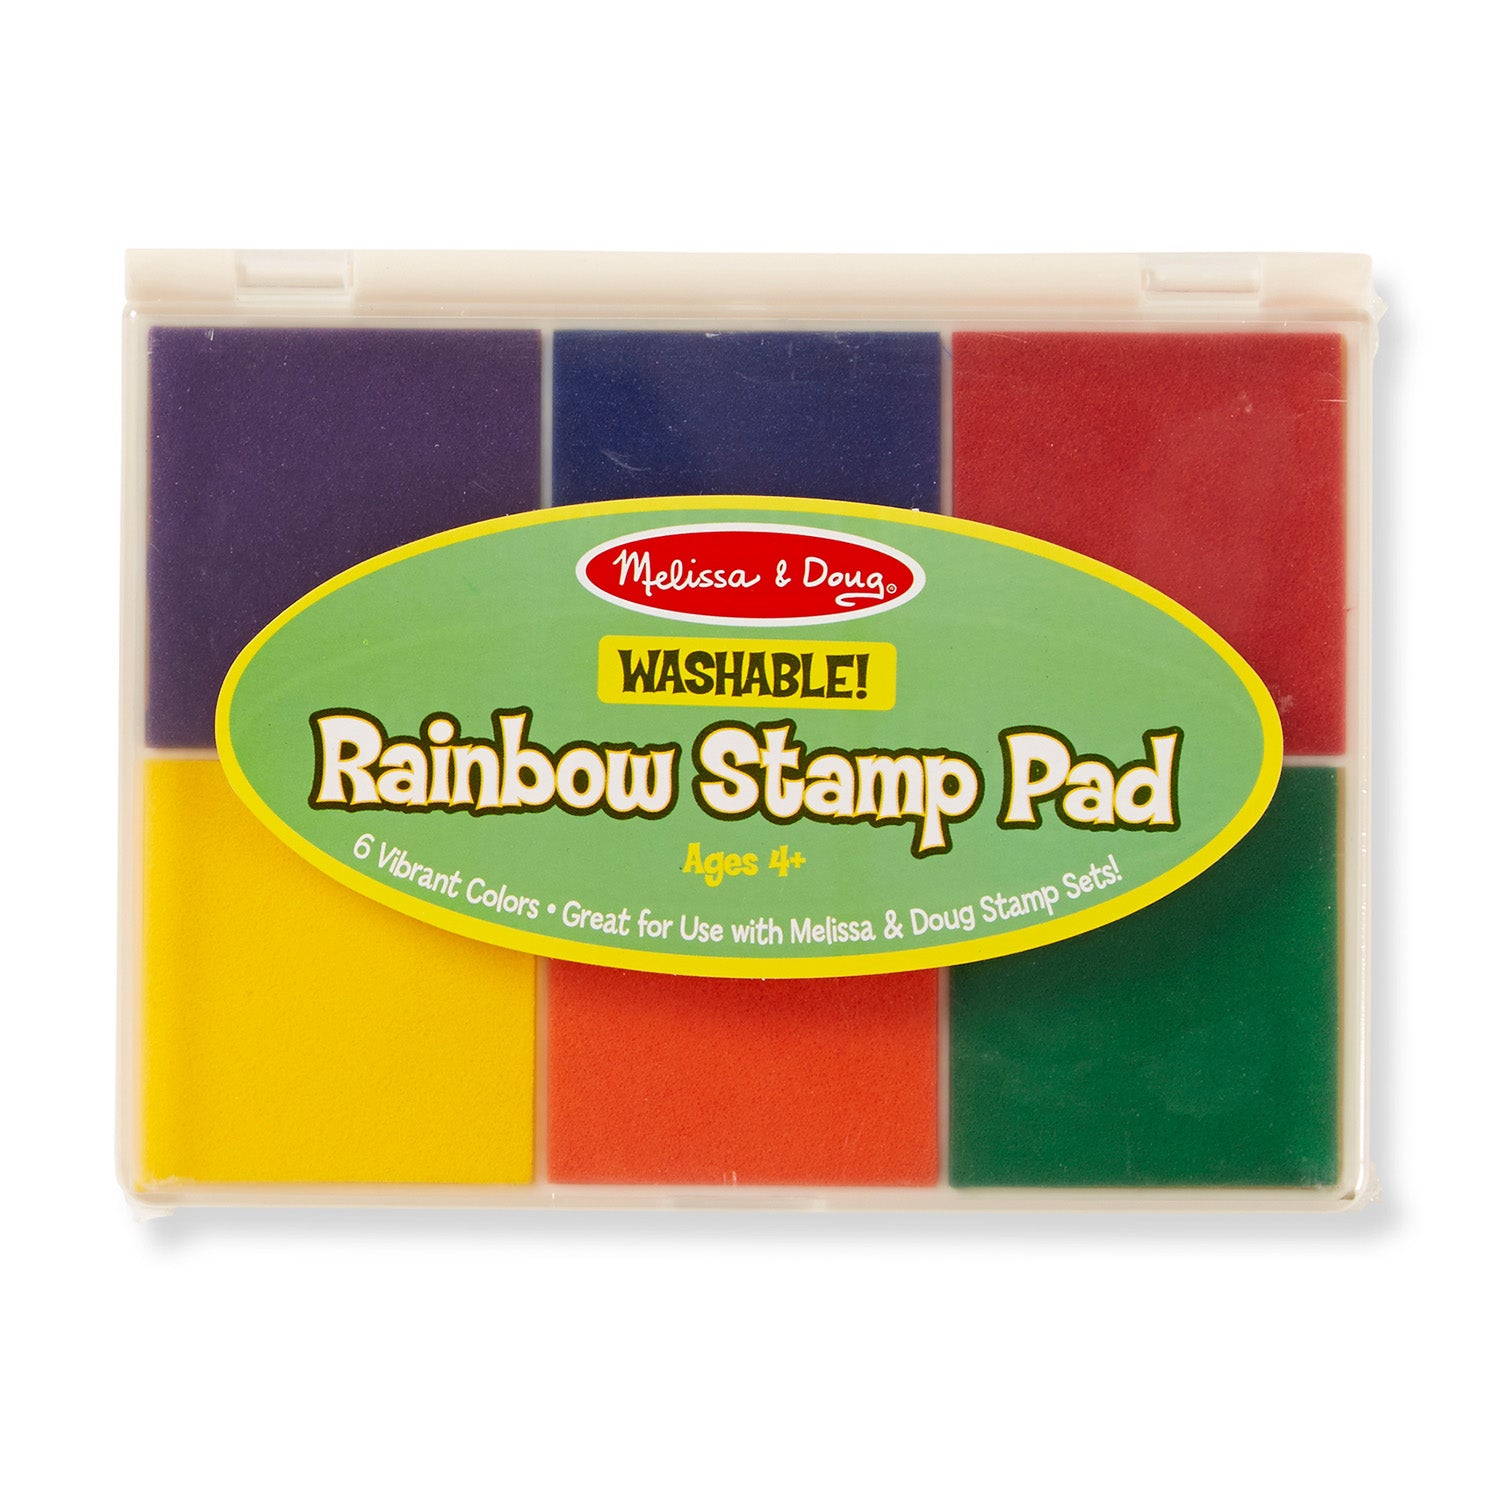 Large Stamp Pad - Non-toxic - Black, Blue or Red Ink - 4-1/4 in